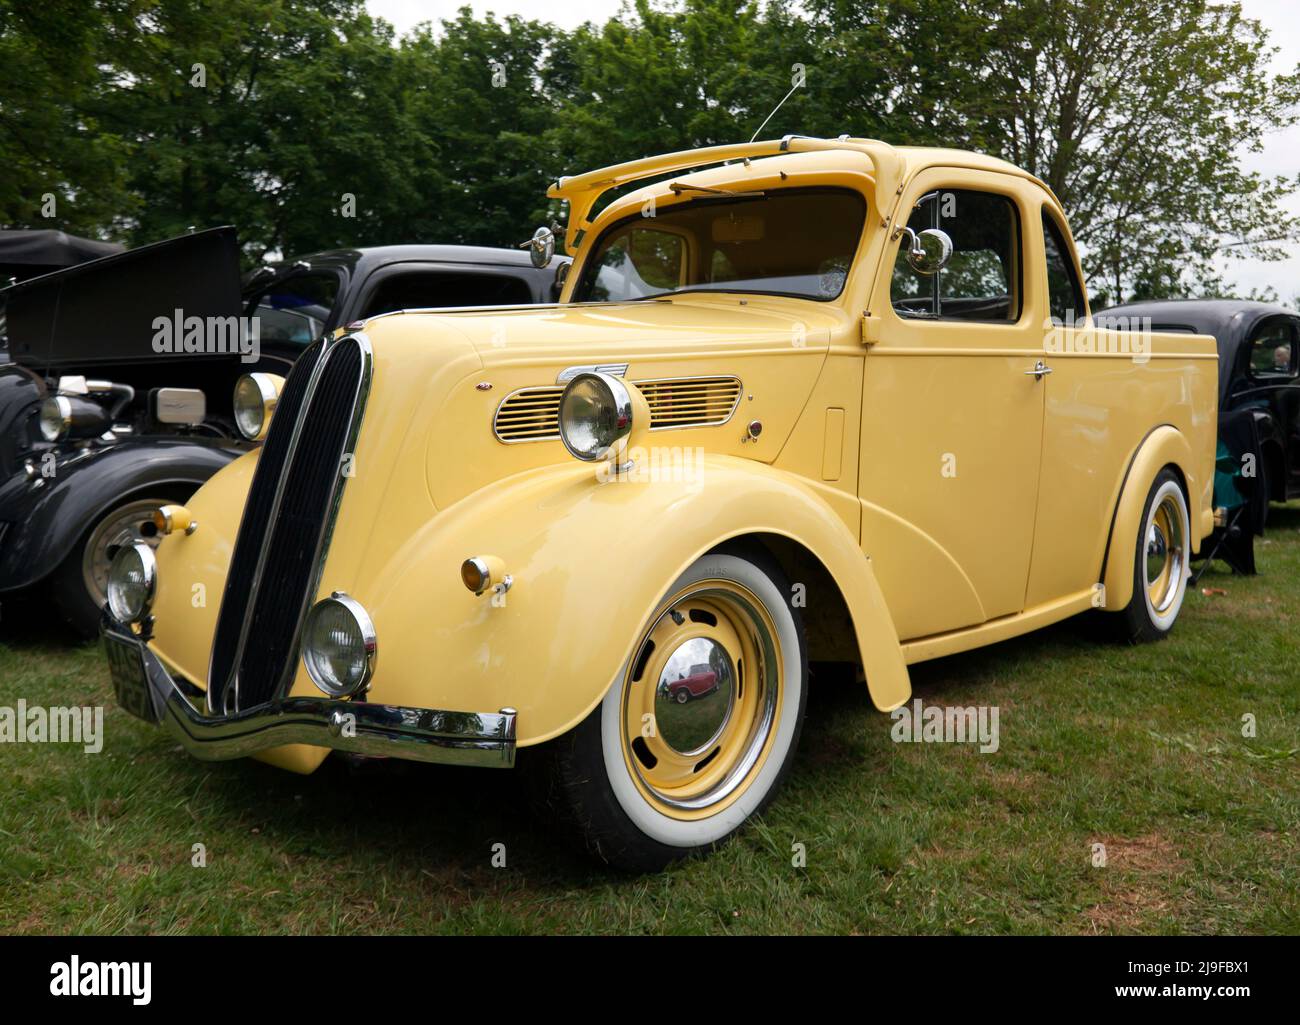 A  spectacular, yellow,  hot-rod, based on a  1950,  Ford Popular 103E Coupe Utility,  on display at the Wickhambreaux Classic Car Show, 2022 Stock Photo